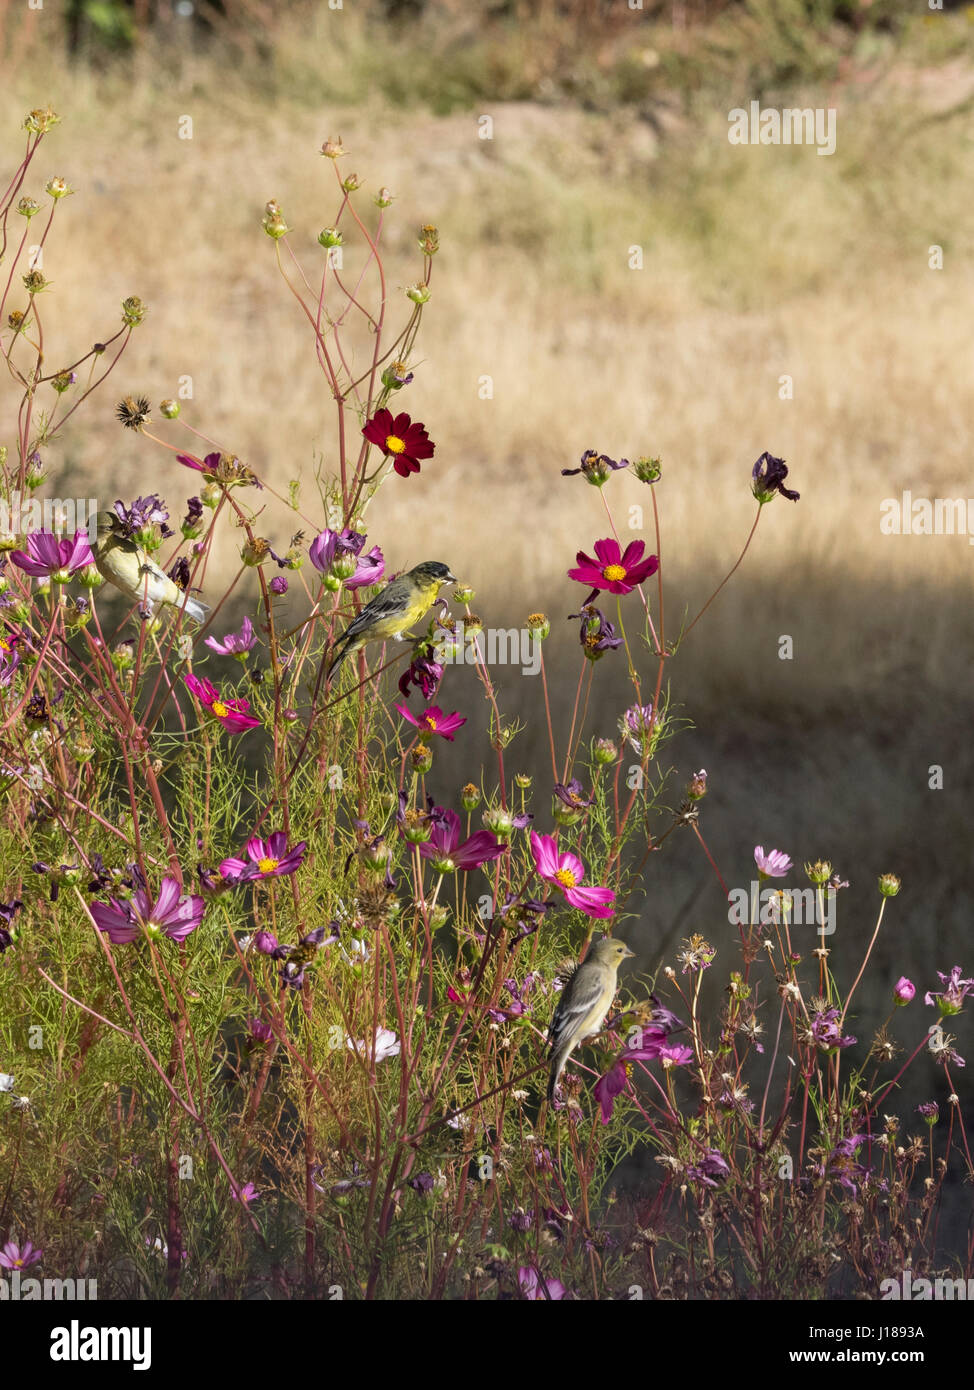 Three finches perched on Cosmos flowers Stock Photo